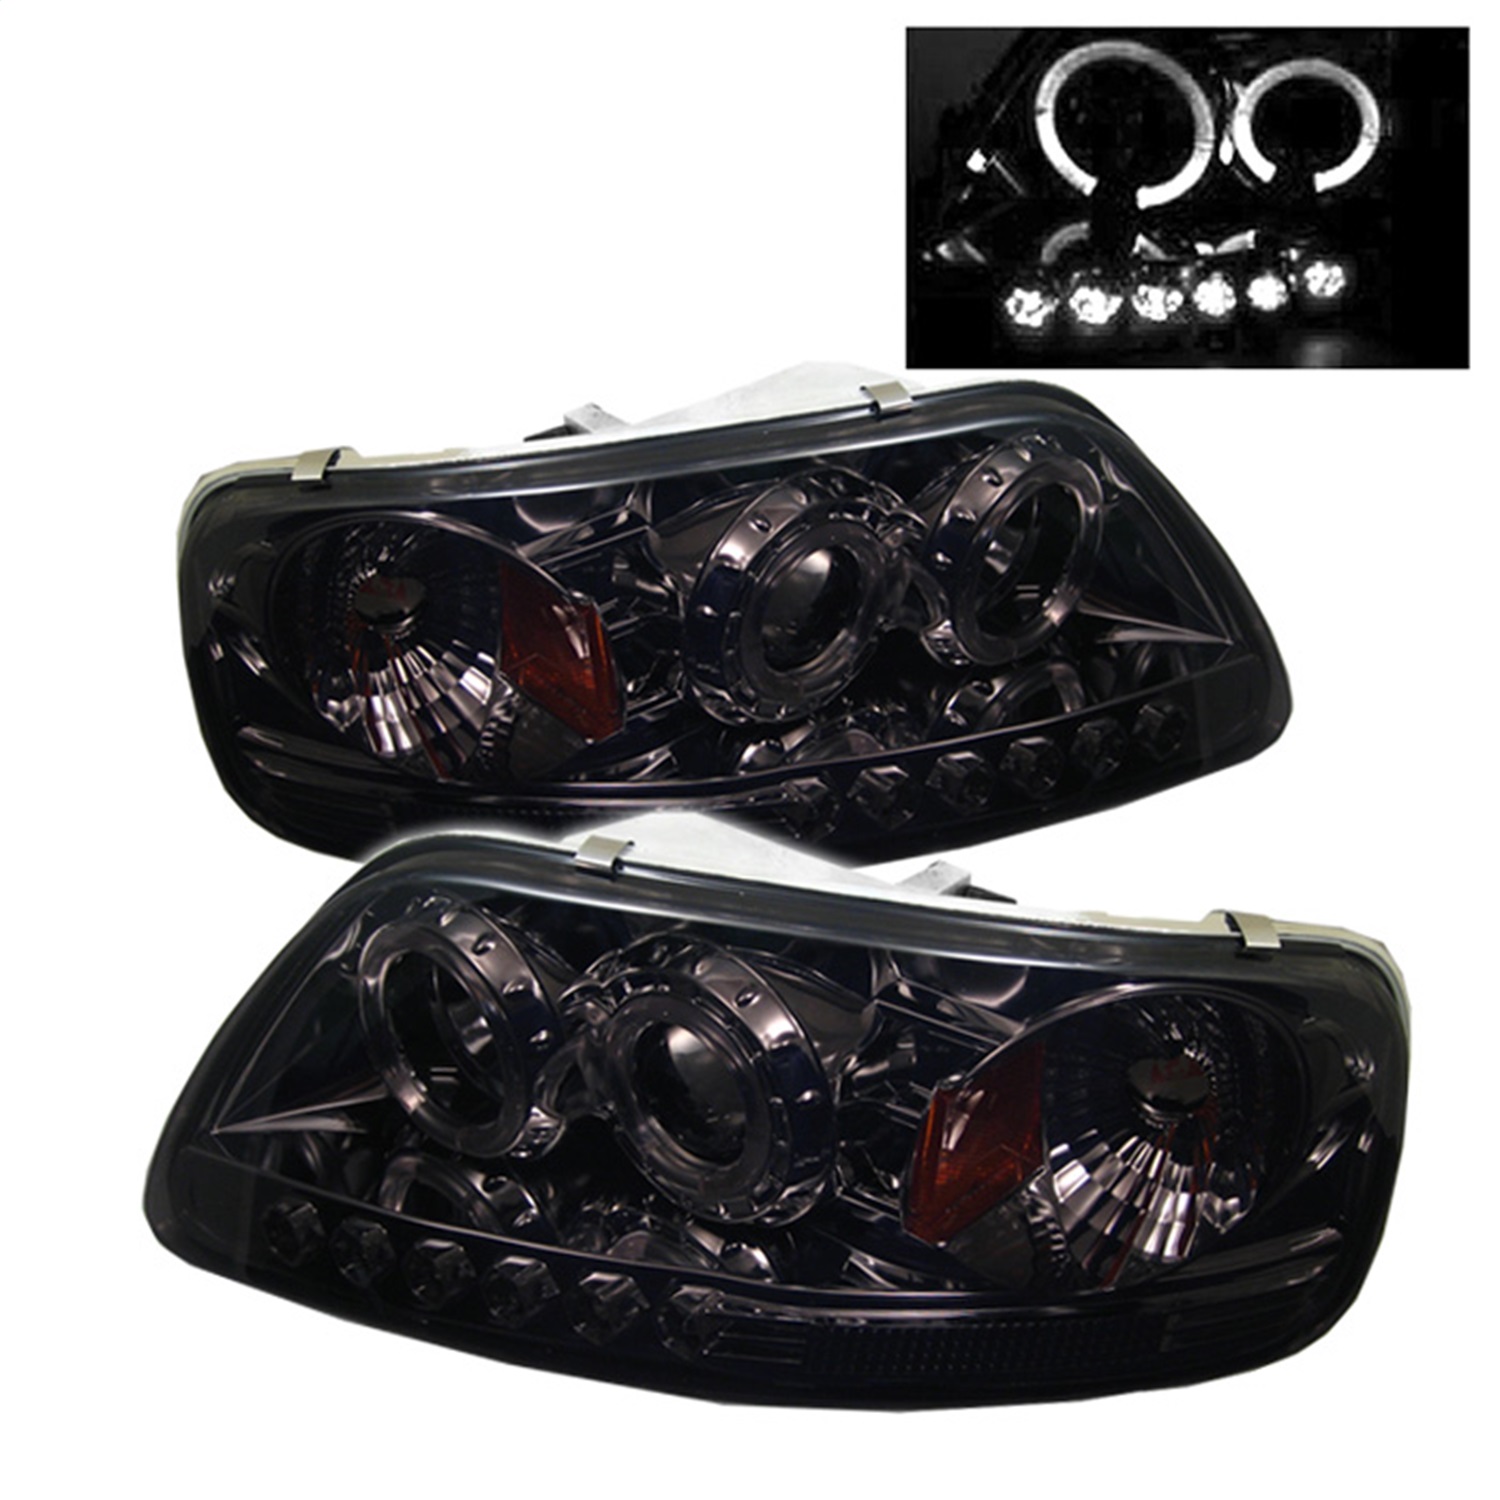 Spyder Auto 5010285 Halo LED Projector Headlights Fits 97-03 Expedition F-150